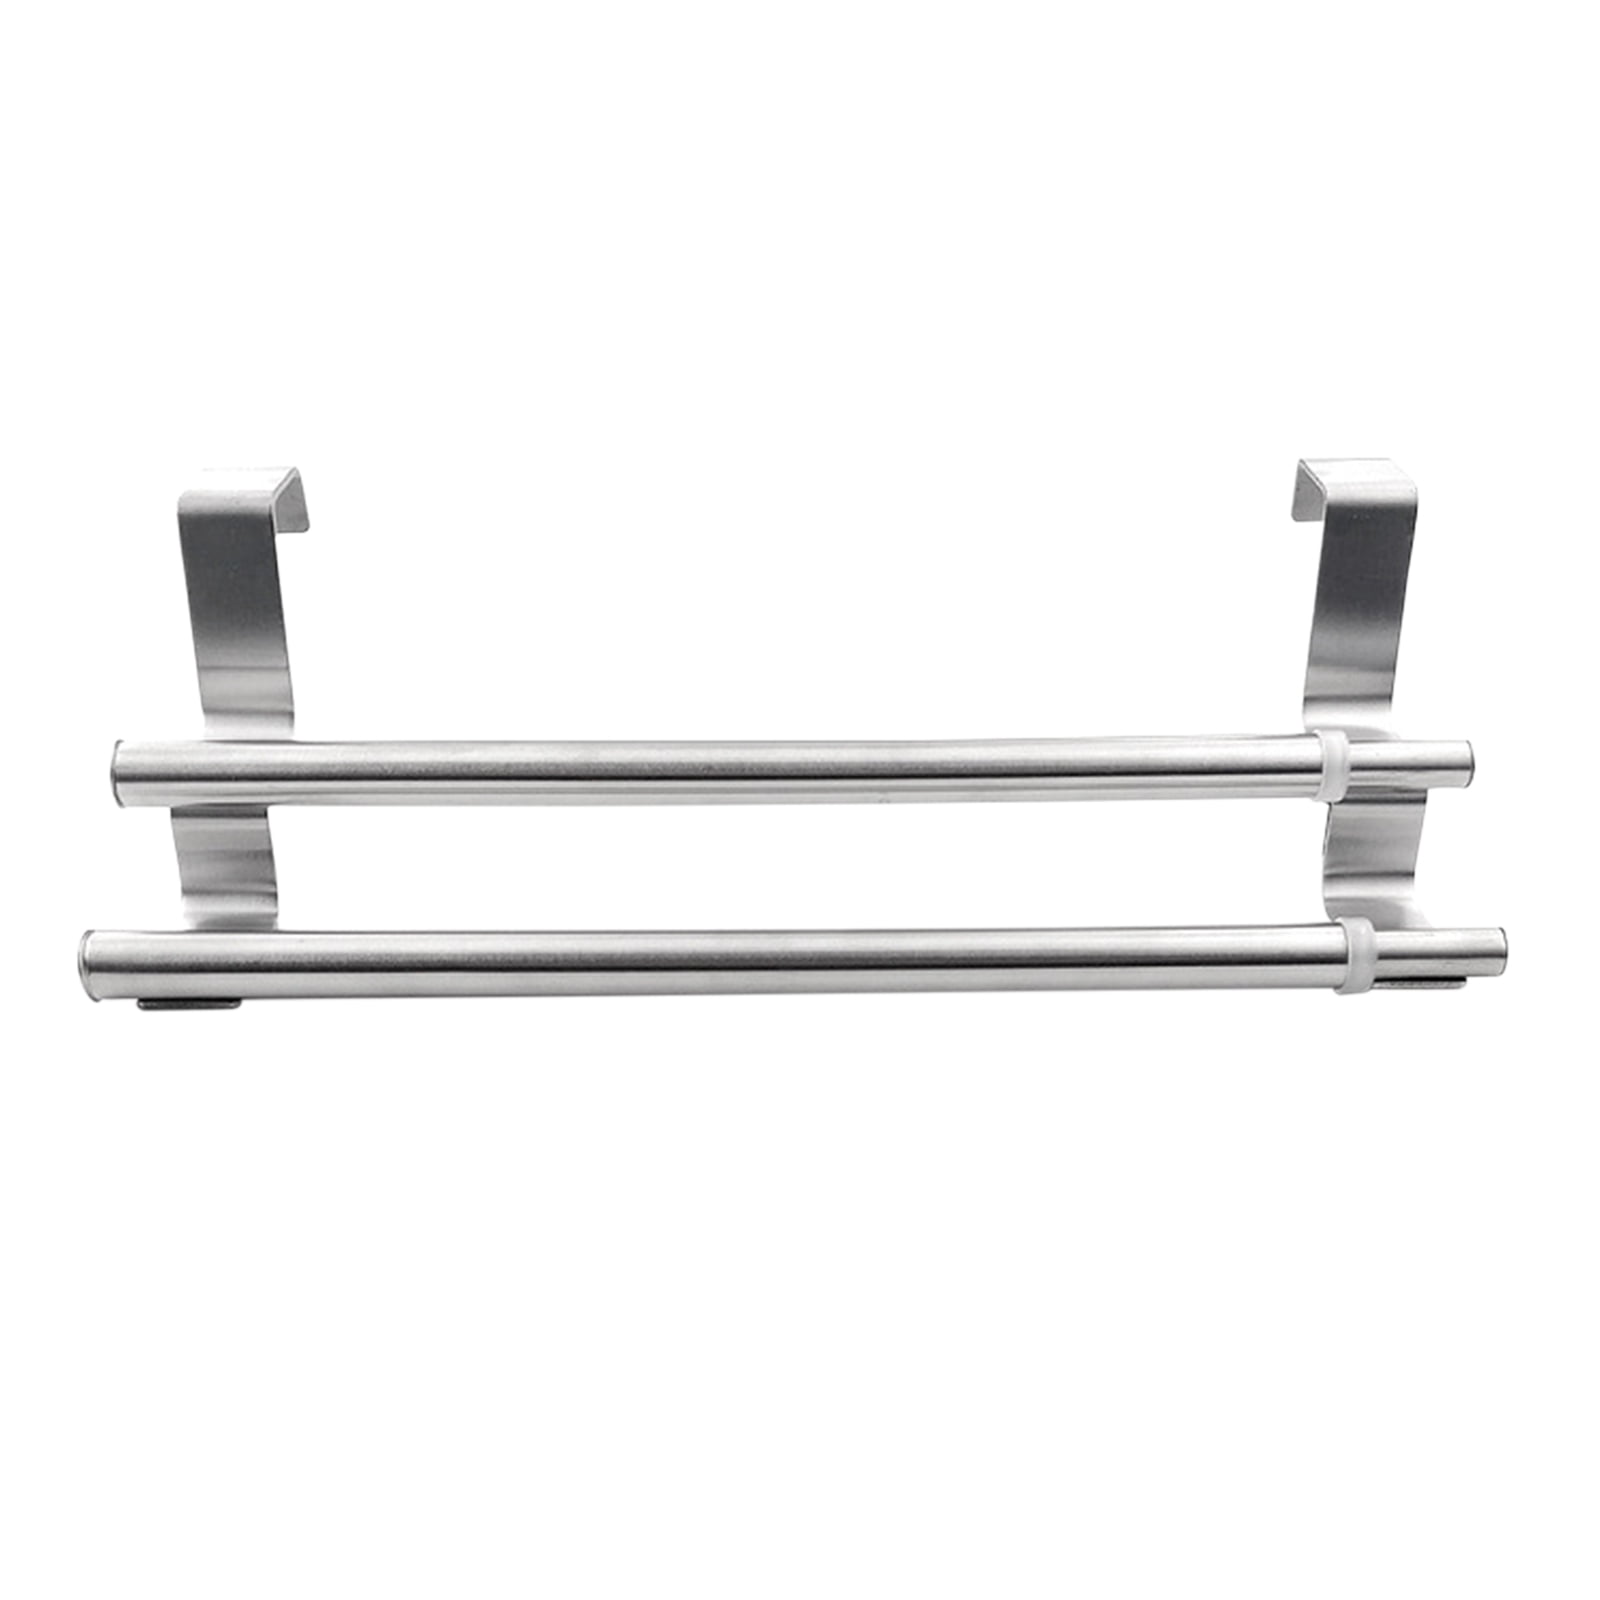 LAUNDRY BATH NEW OVER CABNIT DOOR DOUBLE TOWEL BAR STAINLESS STEEL KITCHEN 